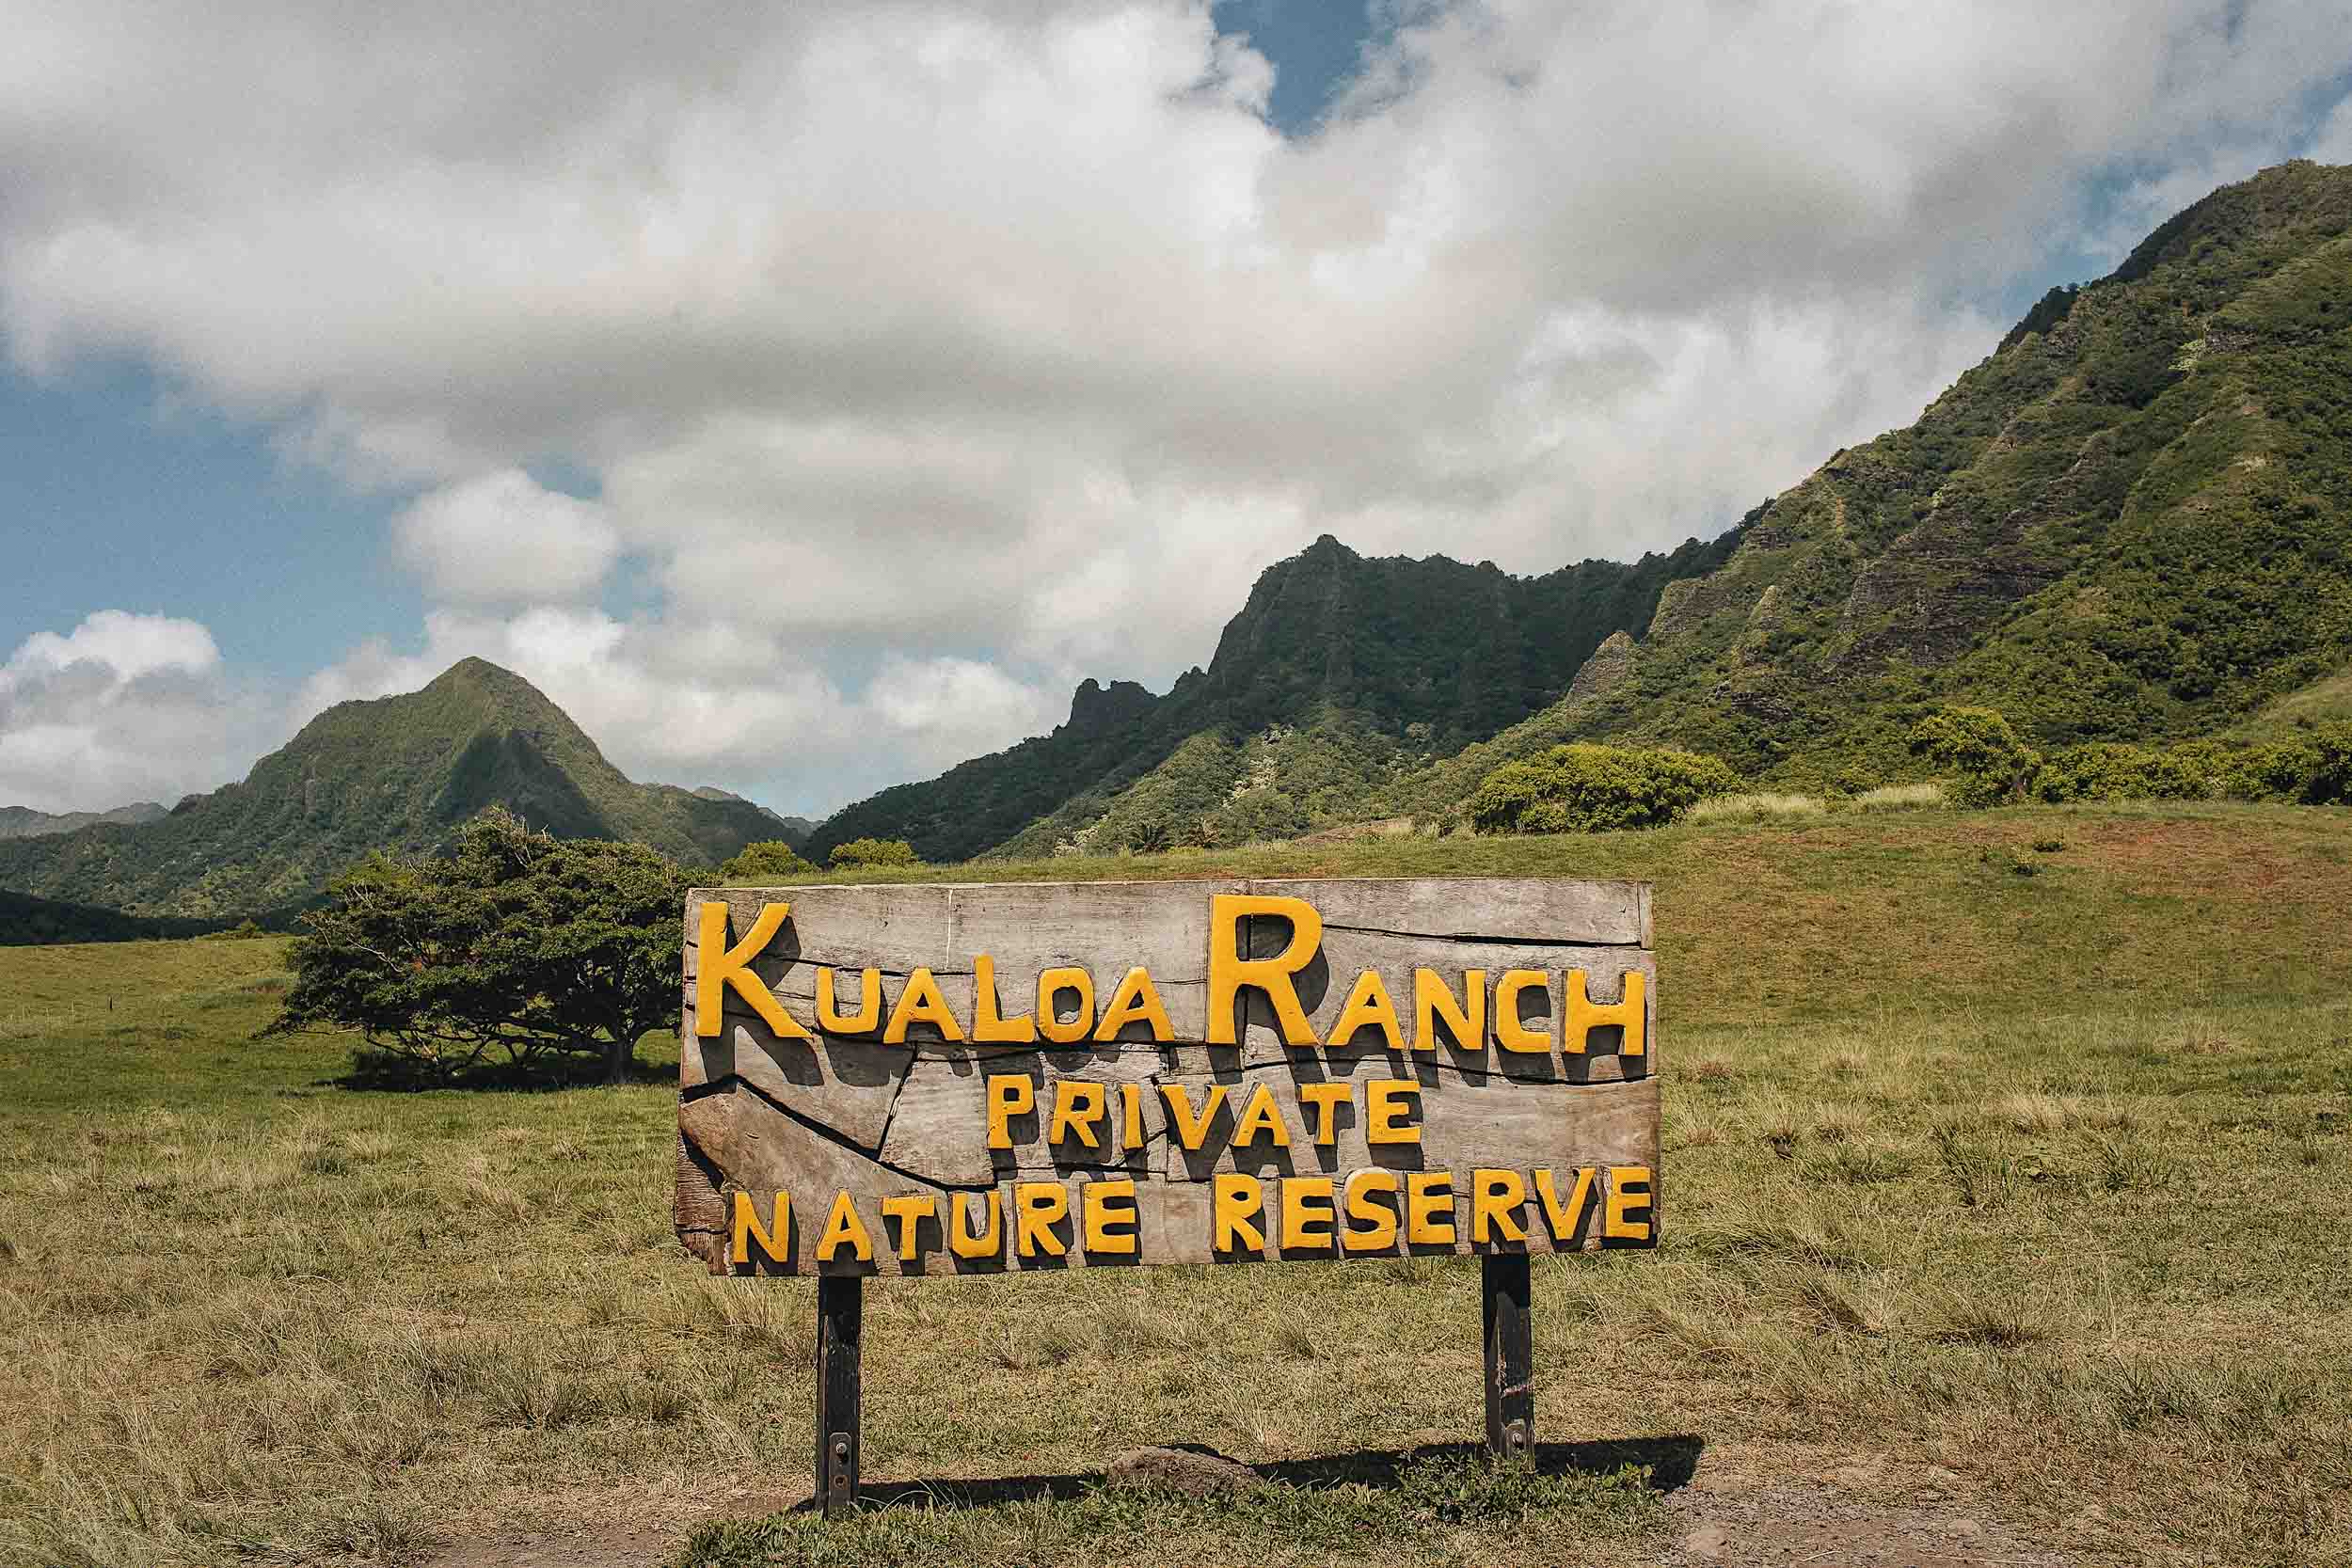 Hawaii Jurassic Park tour — how to get there, what it costs, what activities are available, and more